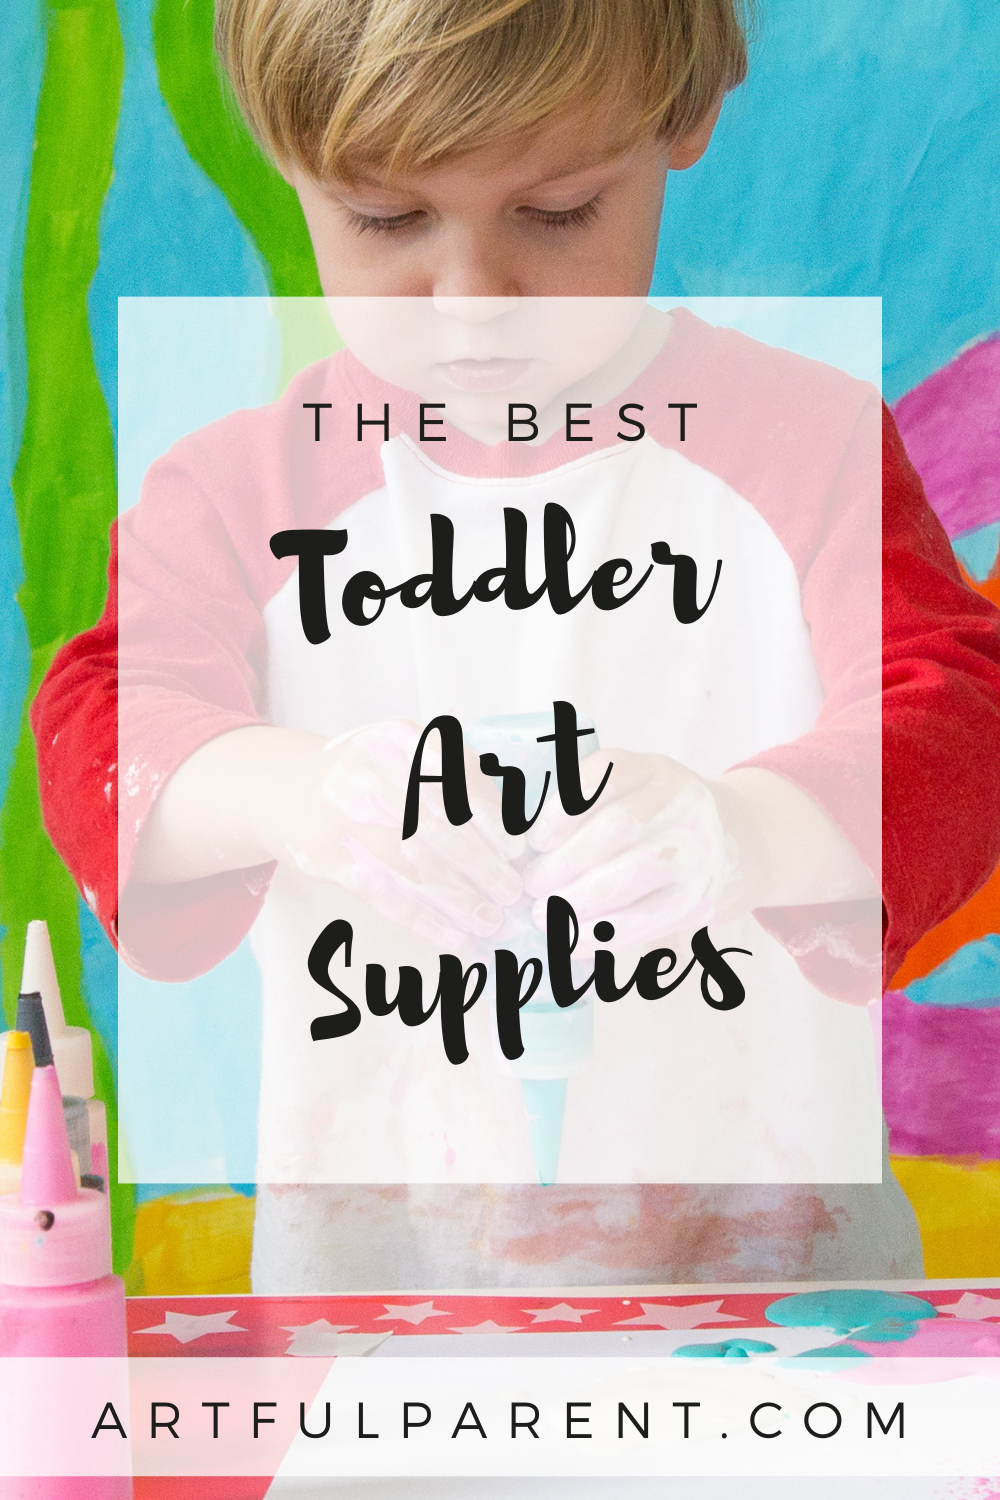 Craft Accessories for Kids - Art Supplies for Children, Toddlers